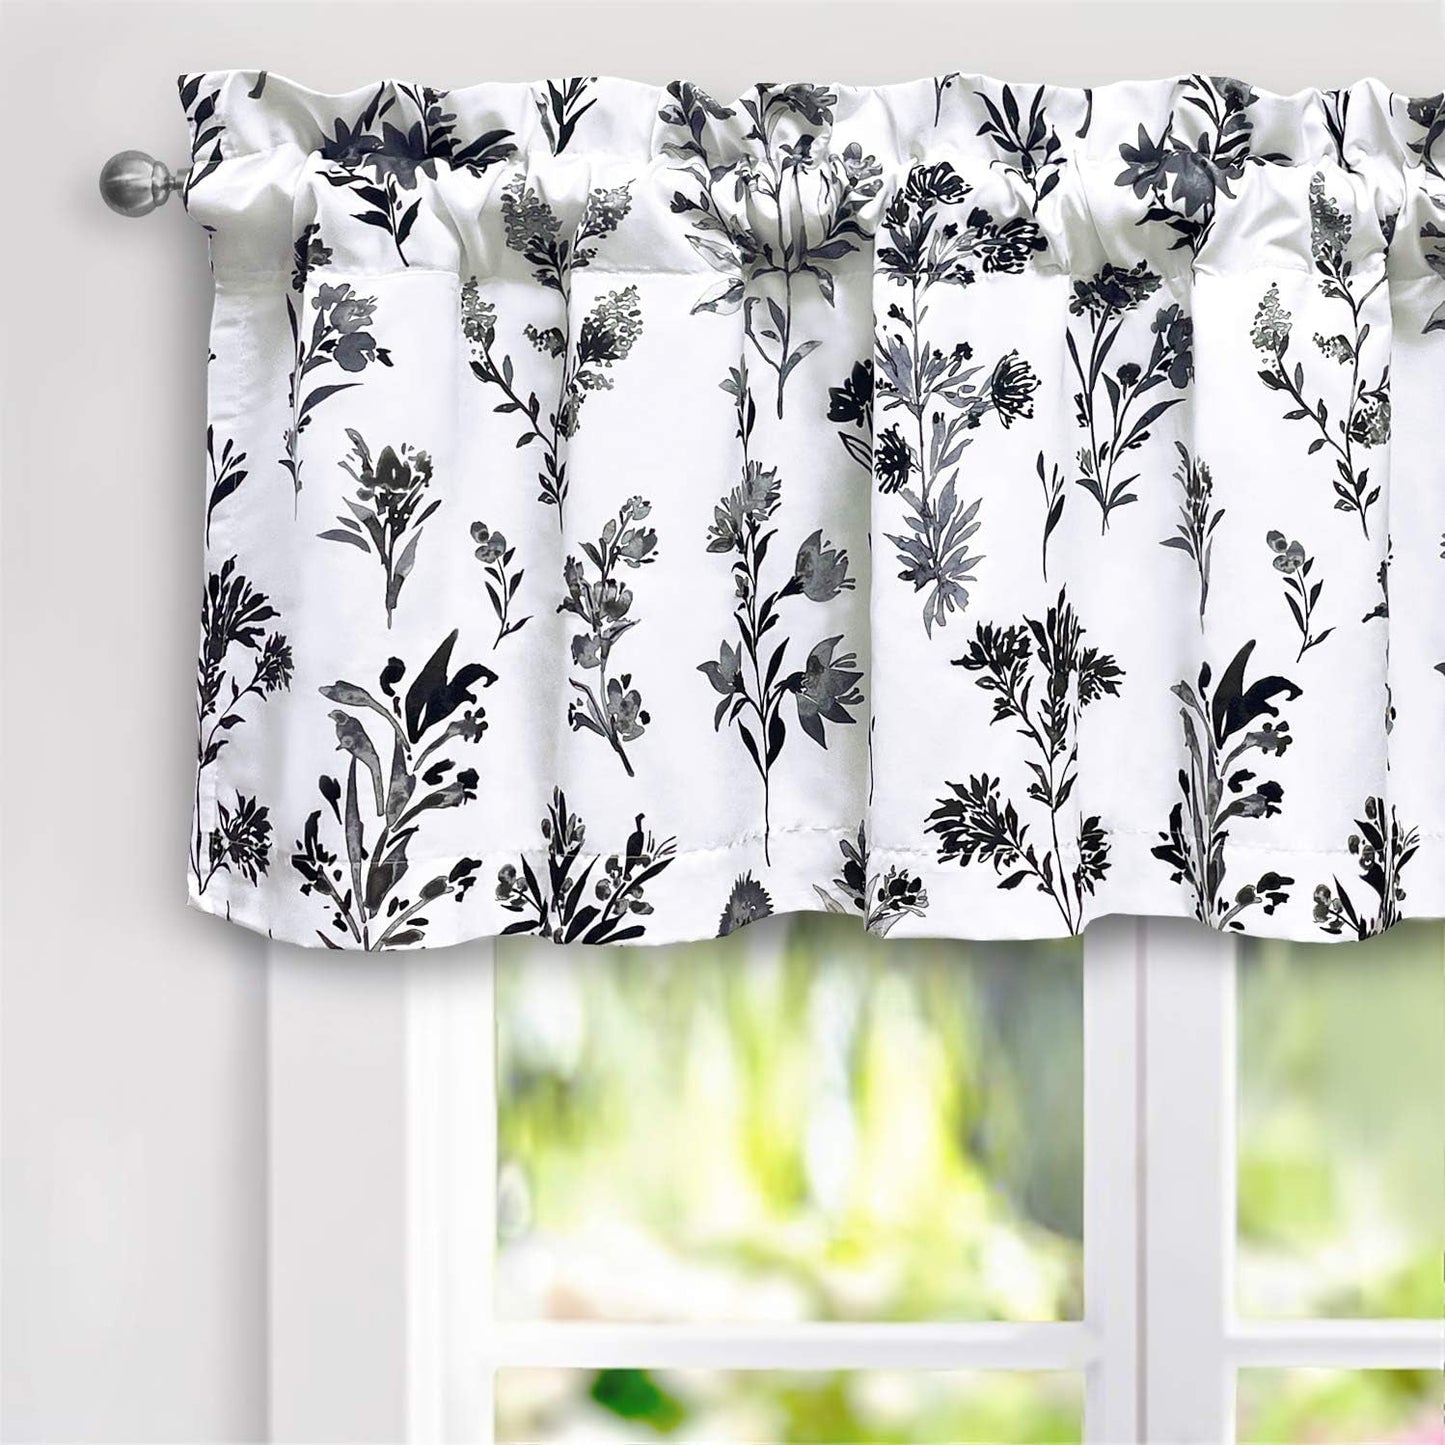 Driftaway Sylvia Floral Botanical Herbs Watercolor Printed Pattern Lined Blackout Thermal Insulated Window Curtain Valance Rod Pocket Single 52 Inch by 18 Inch plus 2 Inch Header Multi